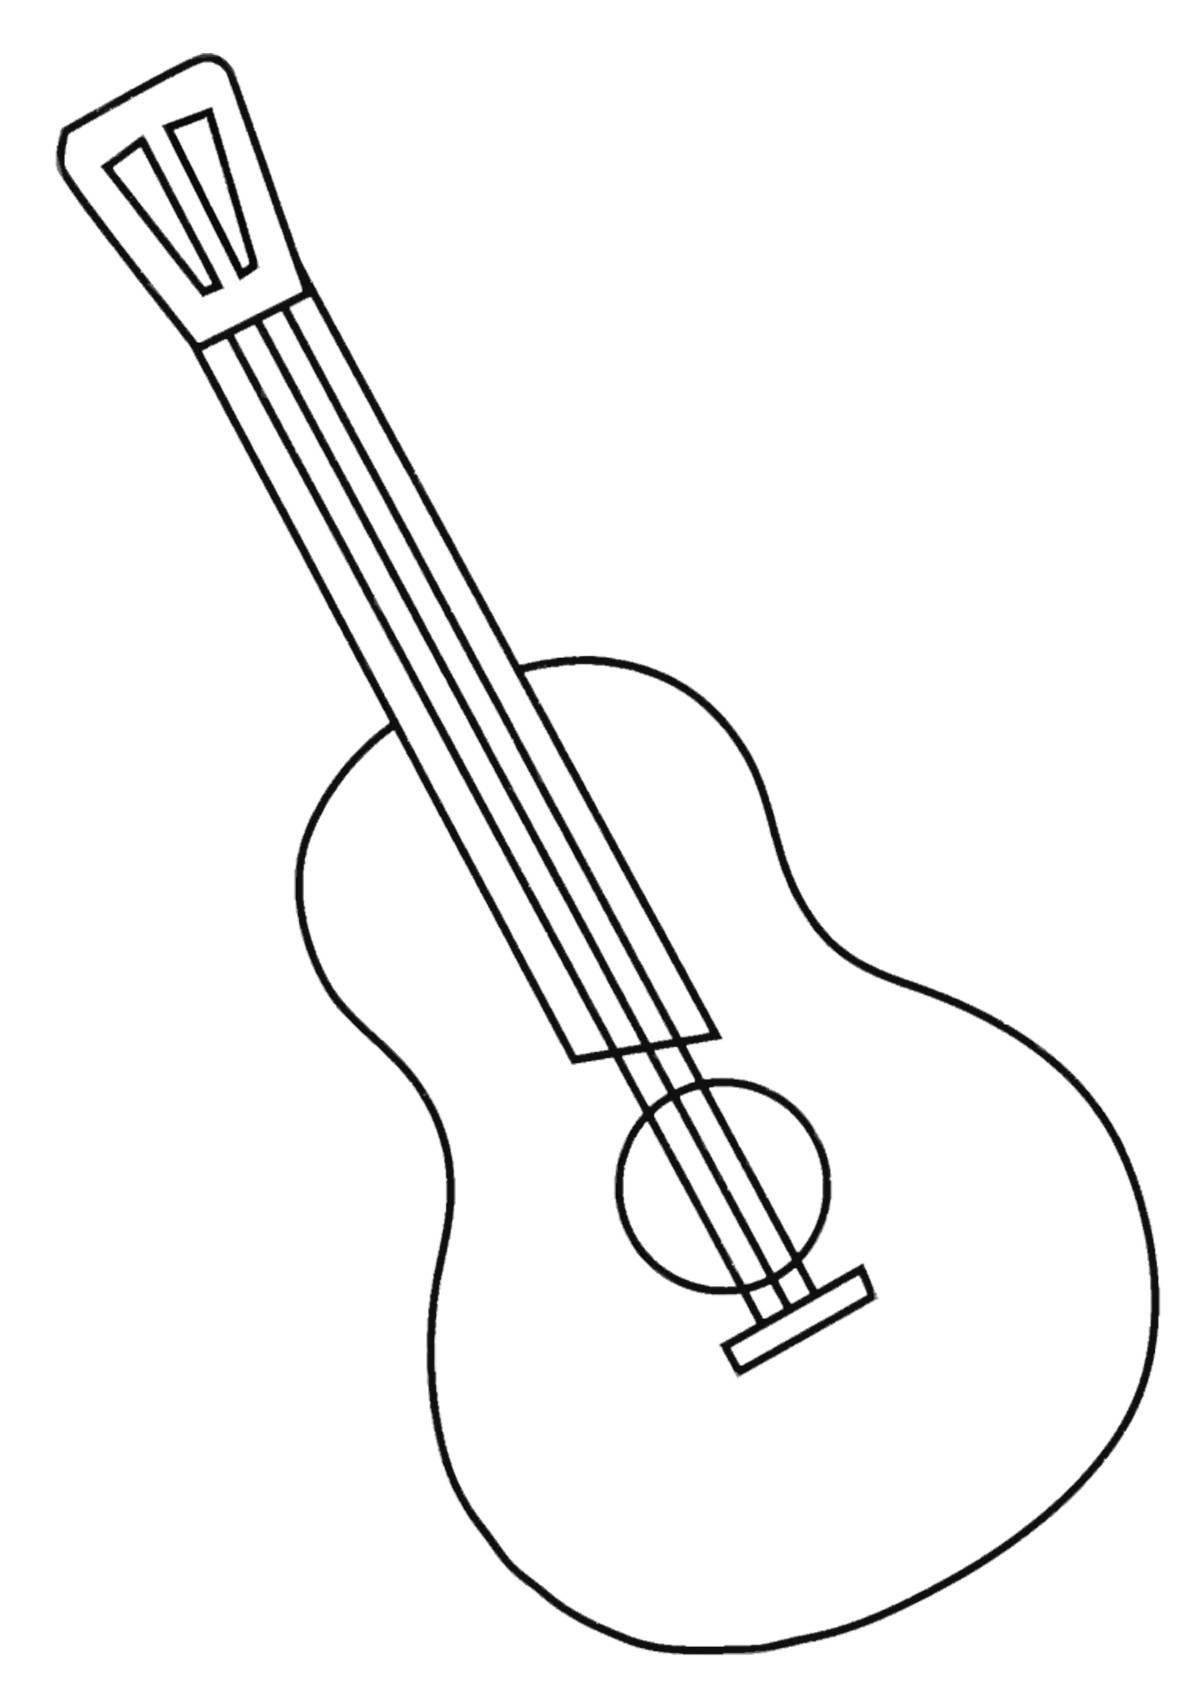 Intriguing musical instruments grade 2 coloring book